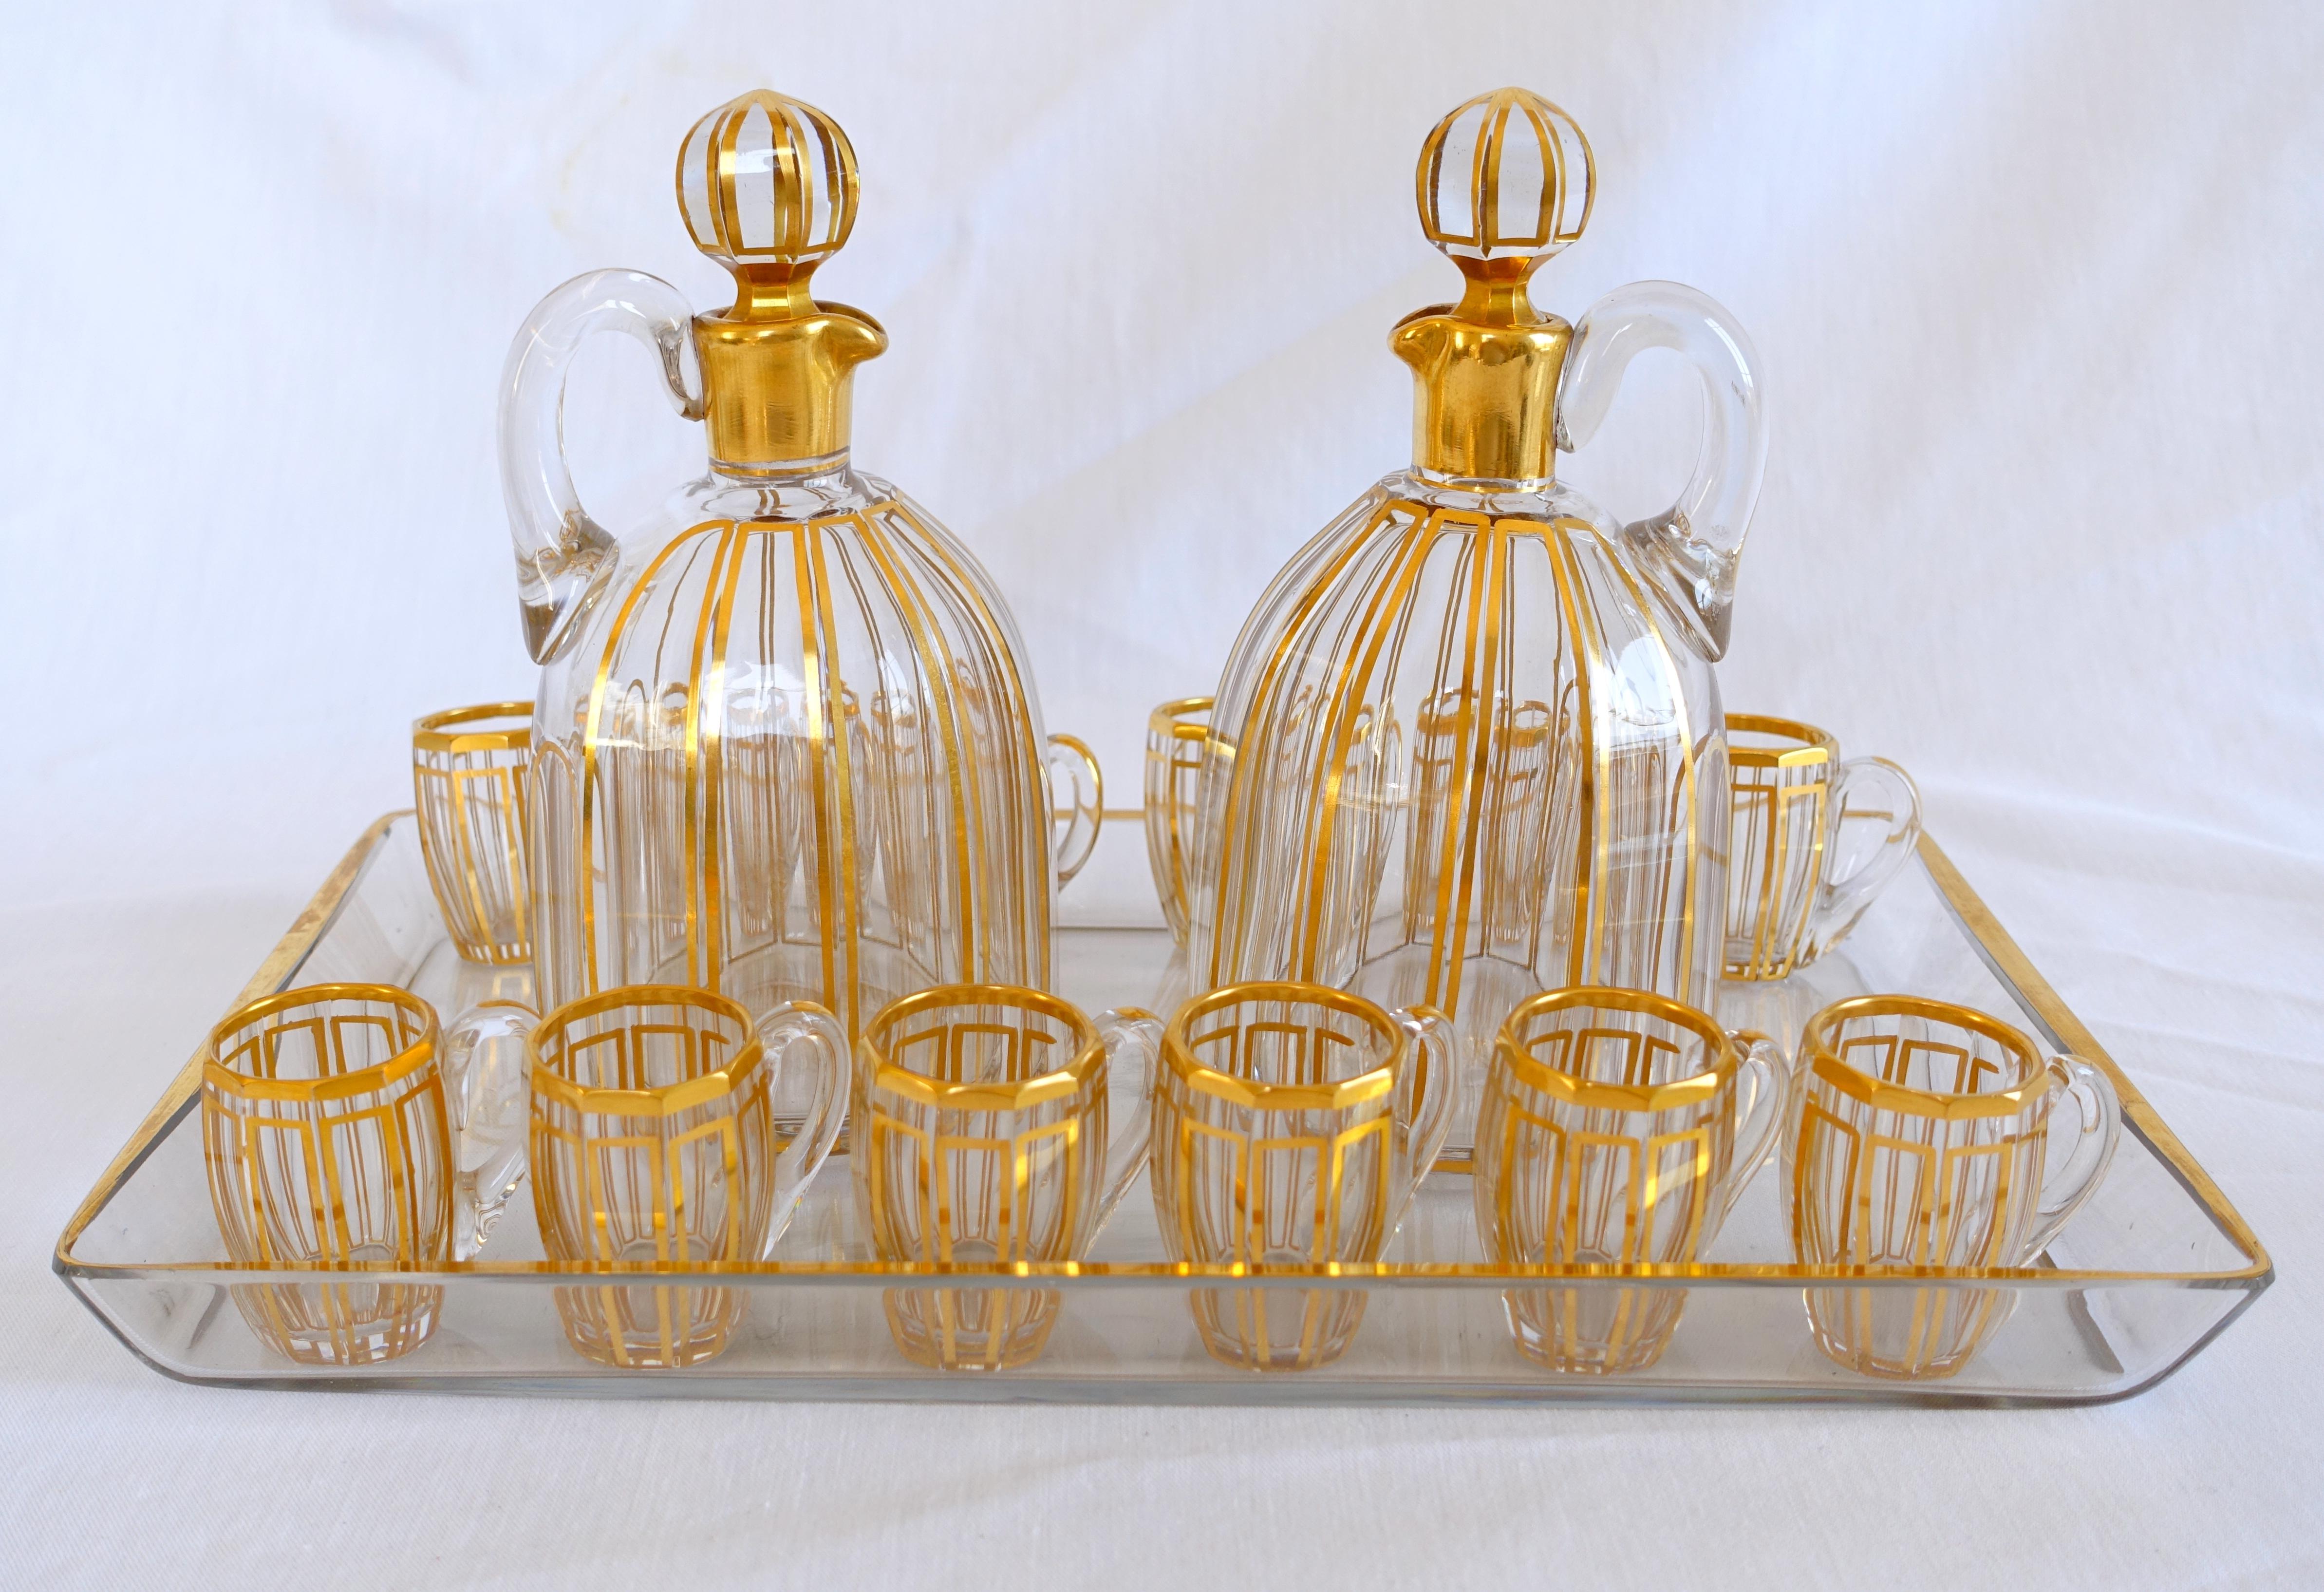 Stunning French antique Baccarat crystal liquor set for 12 guests composed of 2 bottles and 12 glasses (barrel-shaped cups with a handle).

Our set is an elegant, refined Louis XVI style model listed in early 20th century tableware catalogs (1907